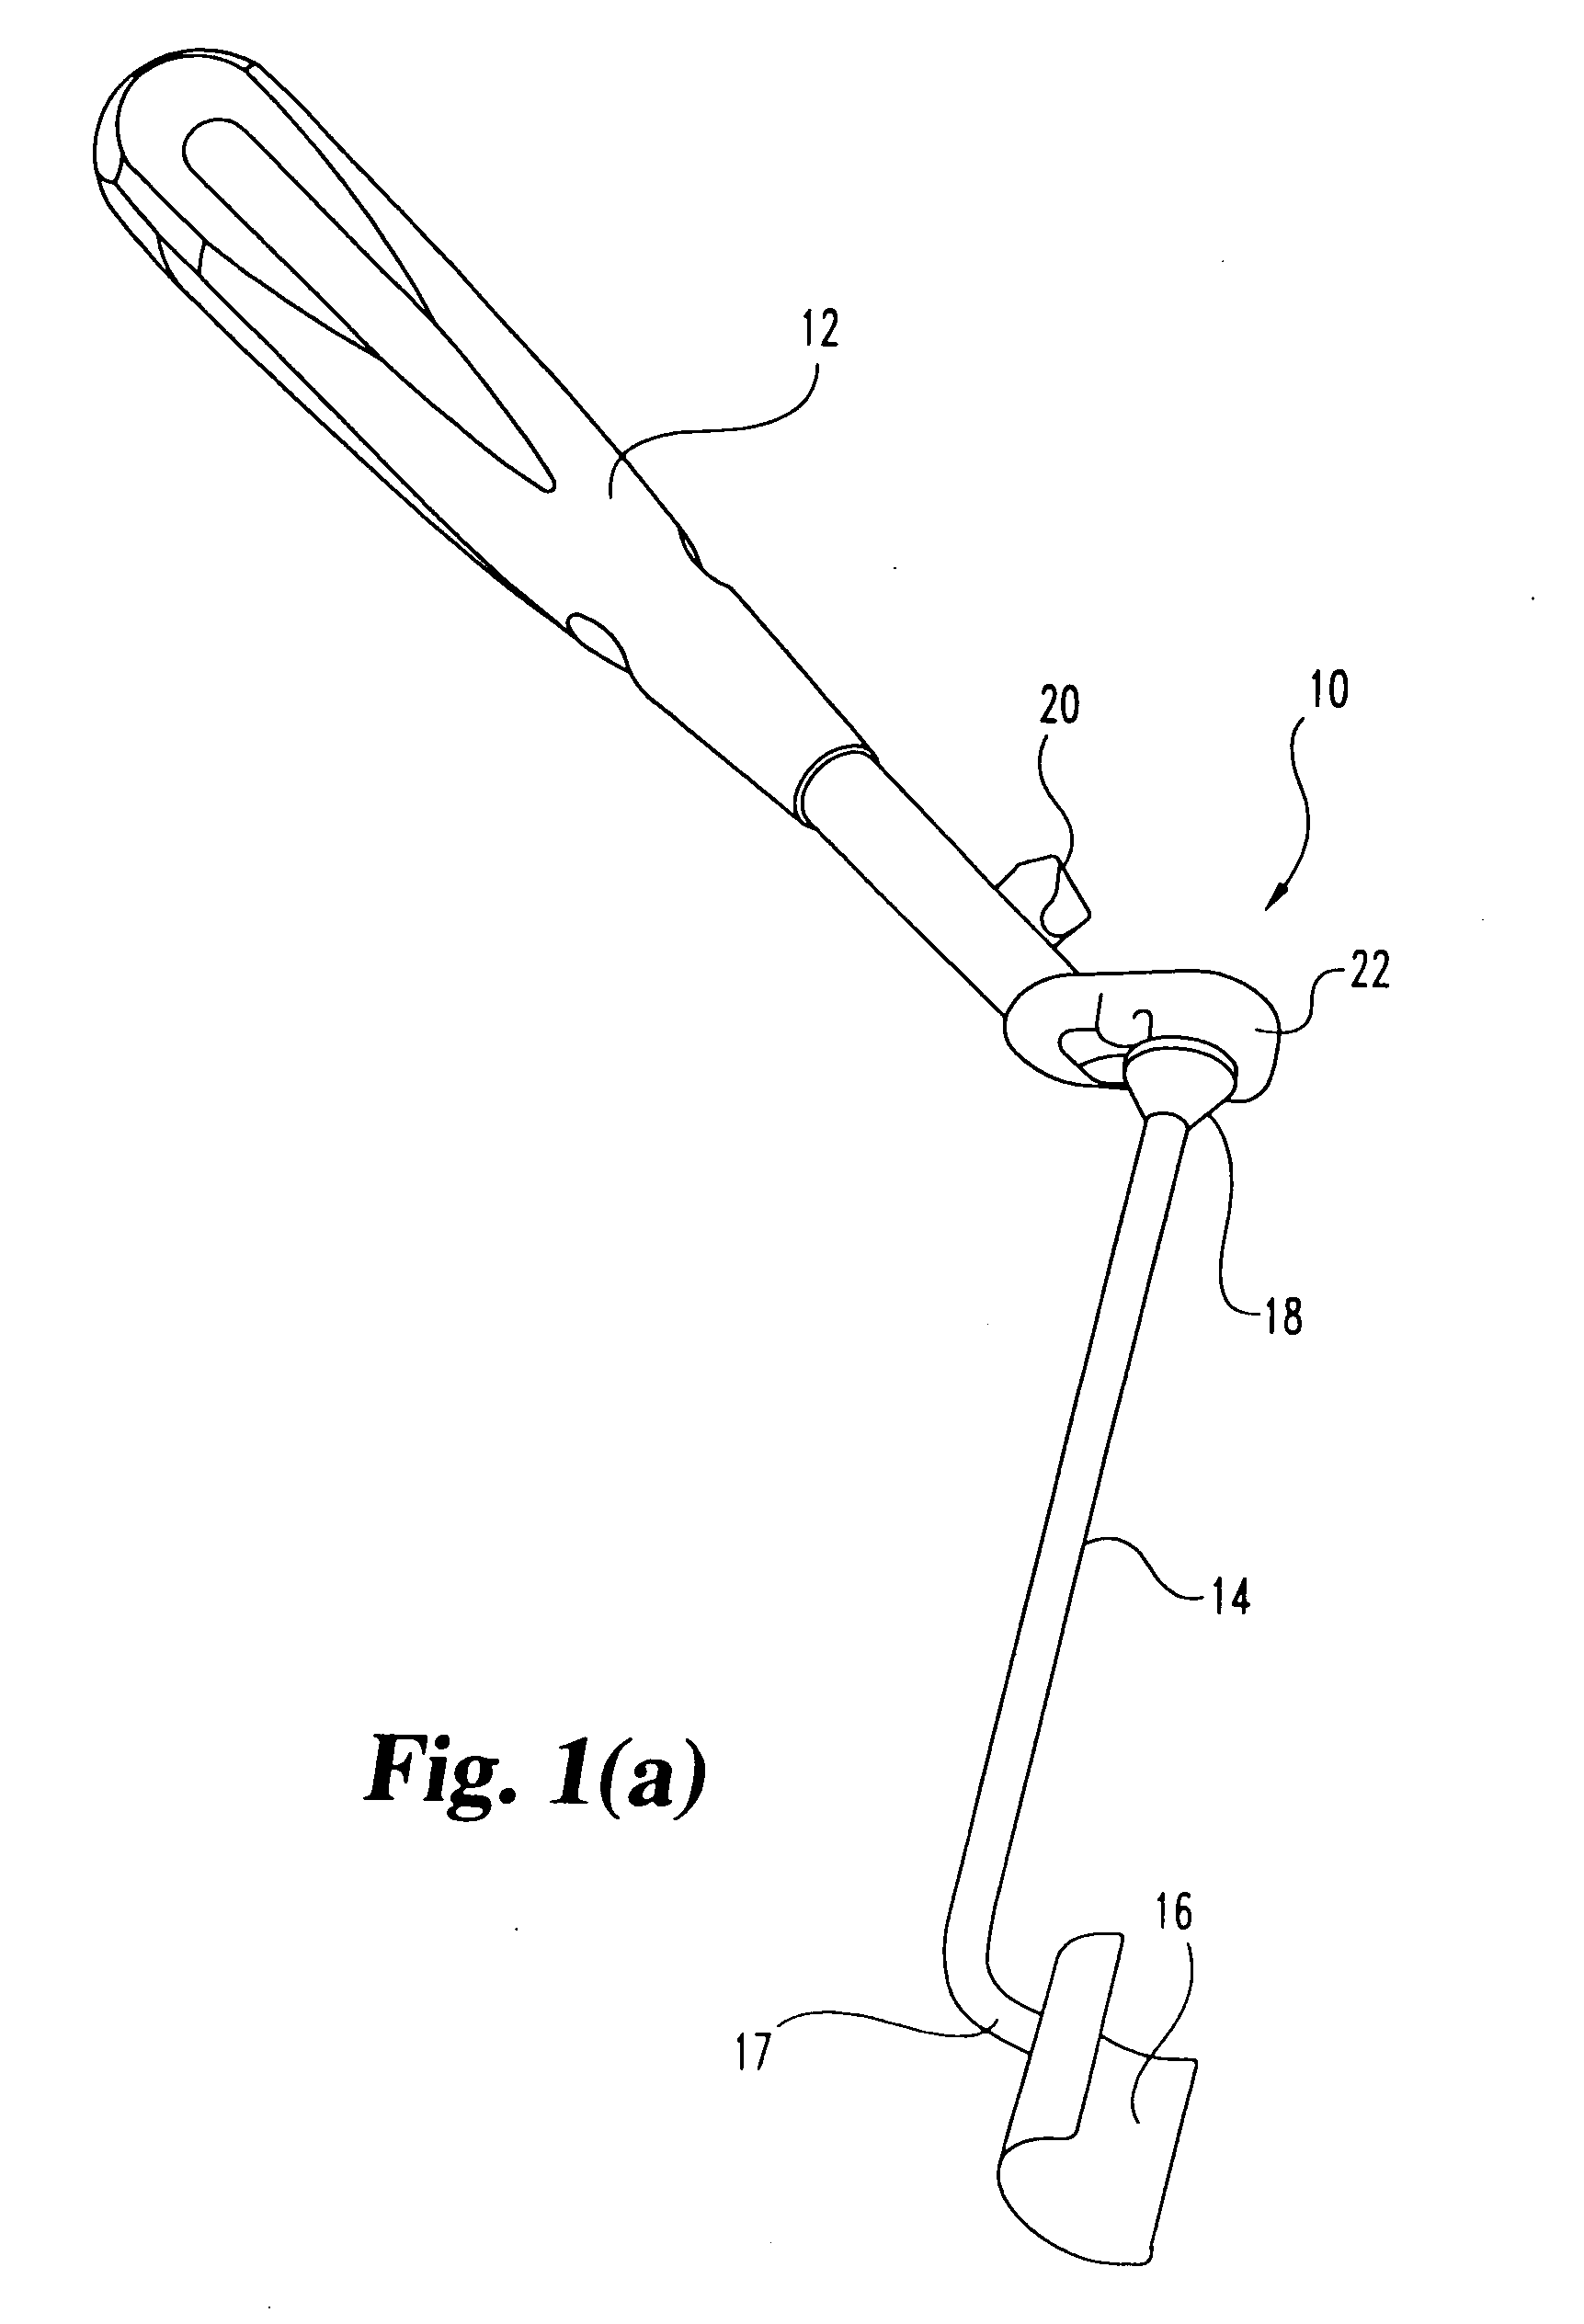 Method and instrumentation for posterior interbody fusion